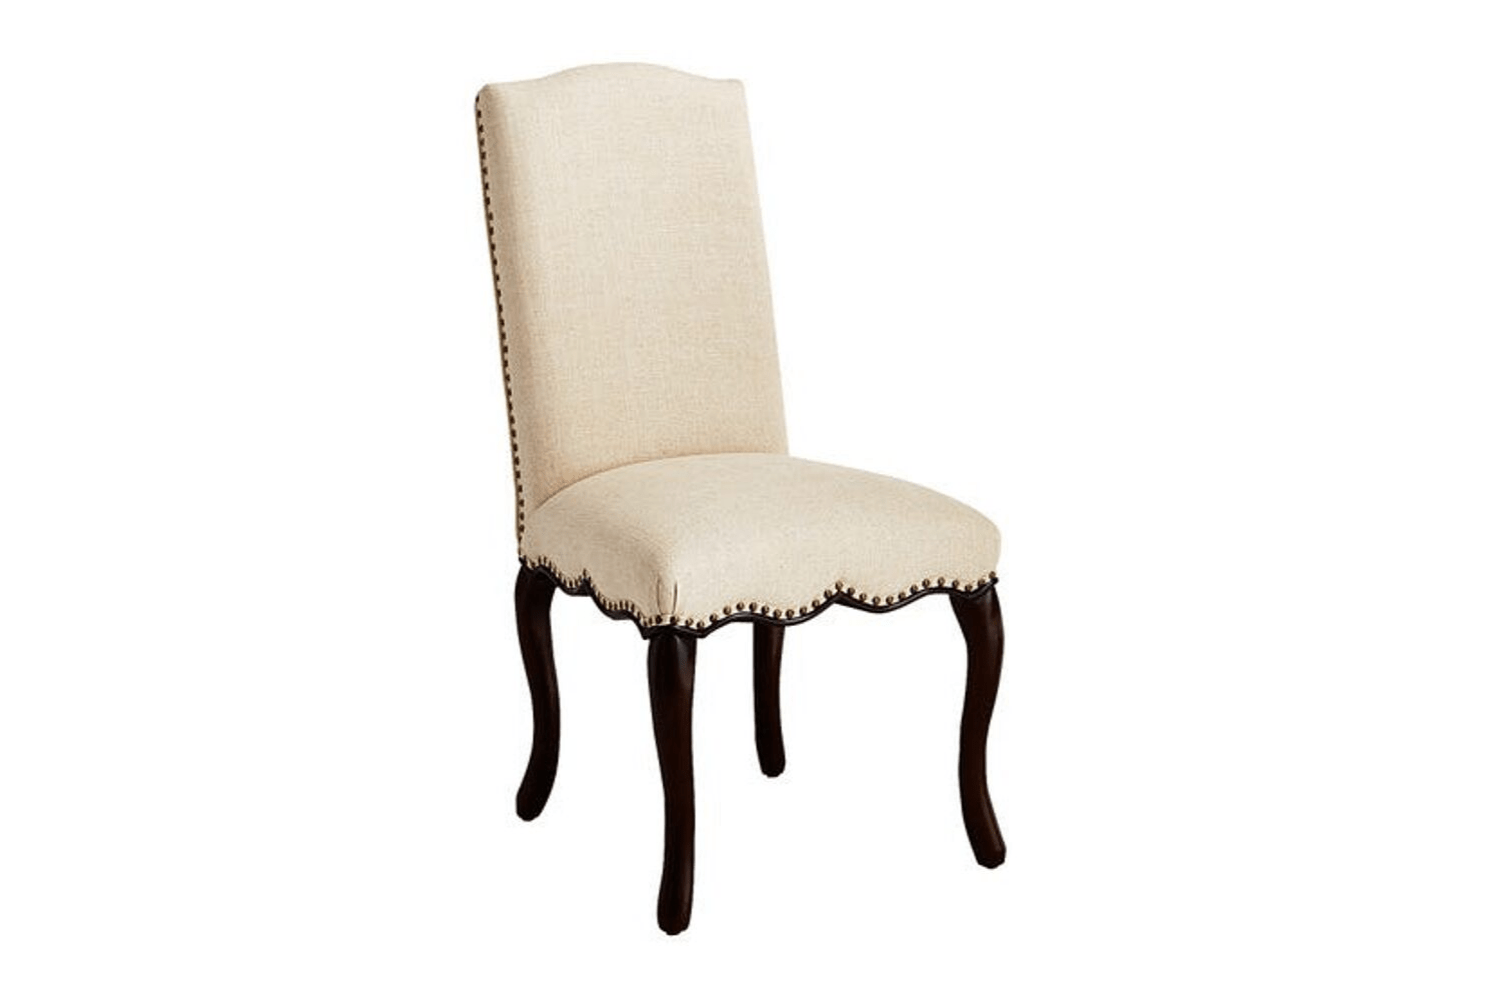 Ebay Pier One Dining Room Chair Covers